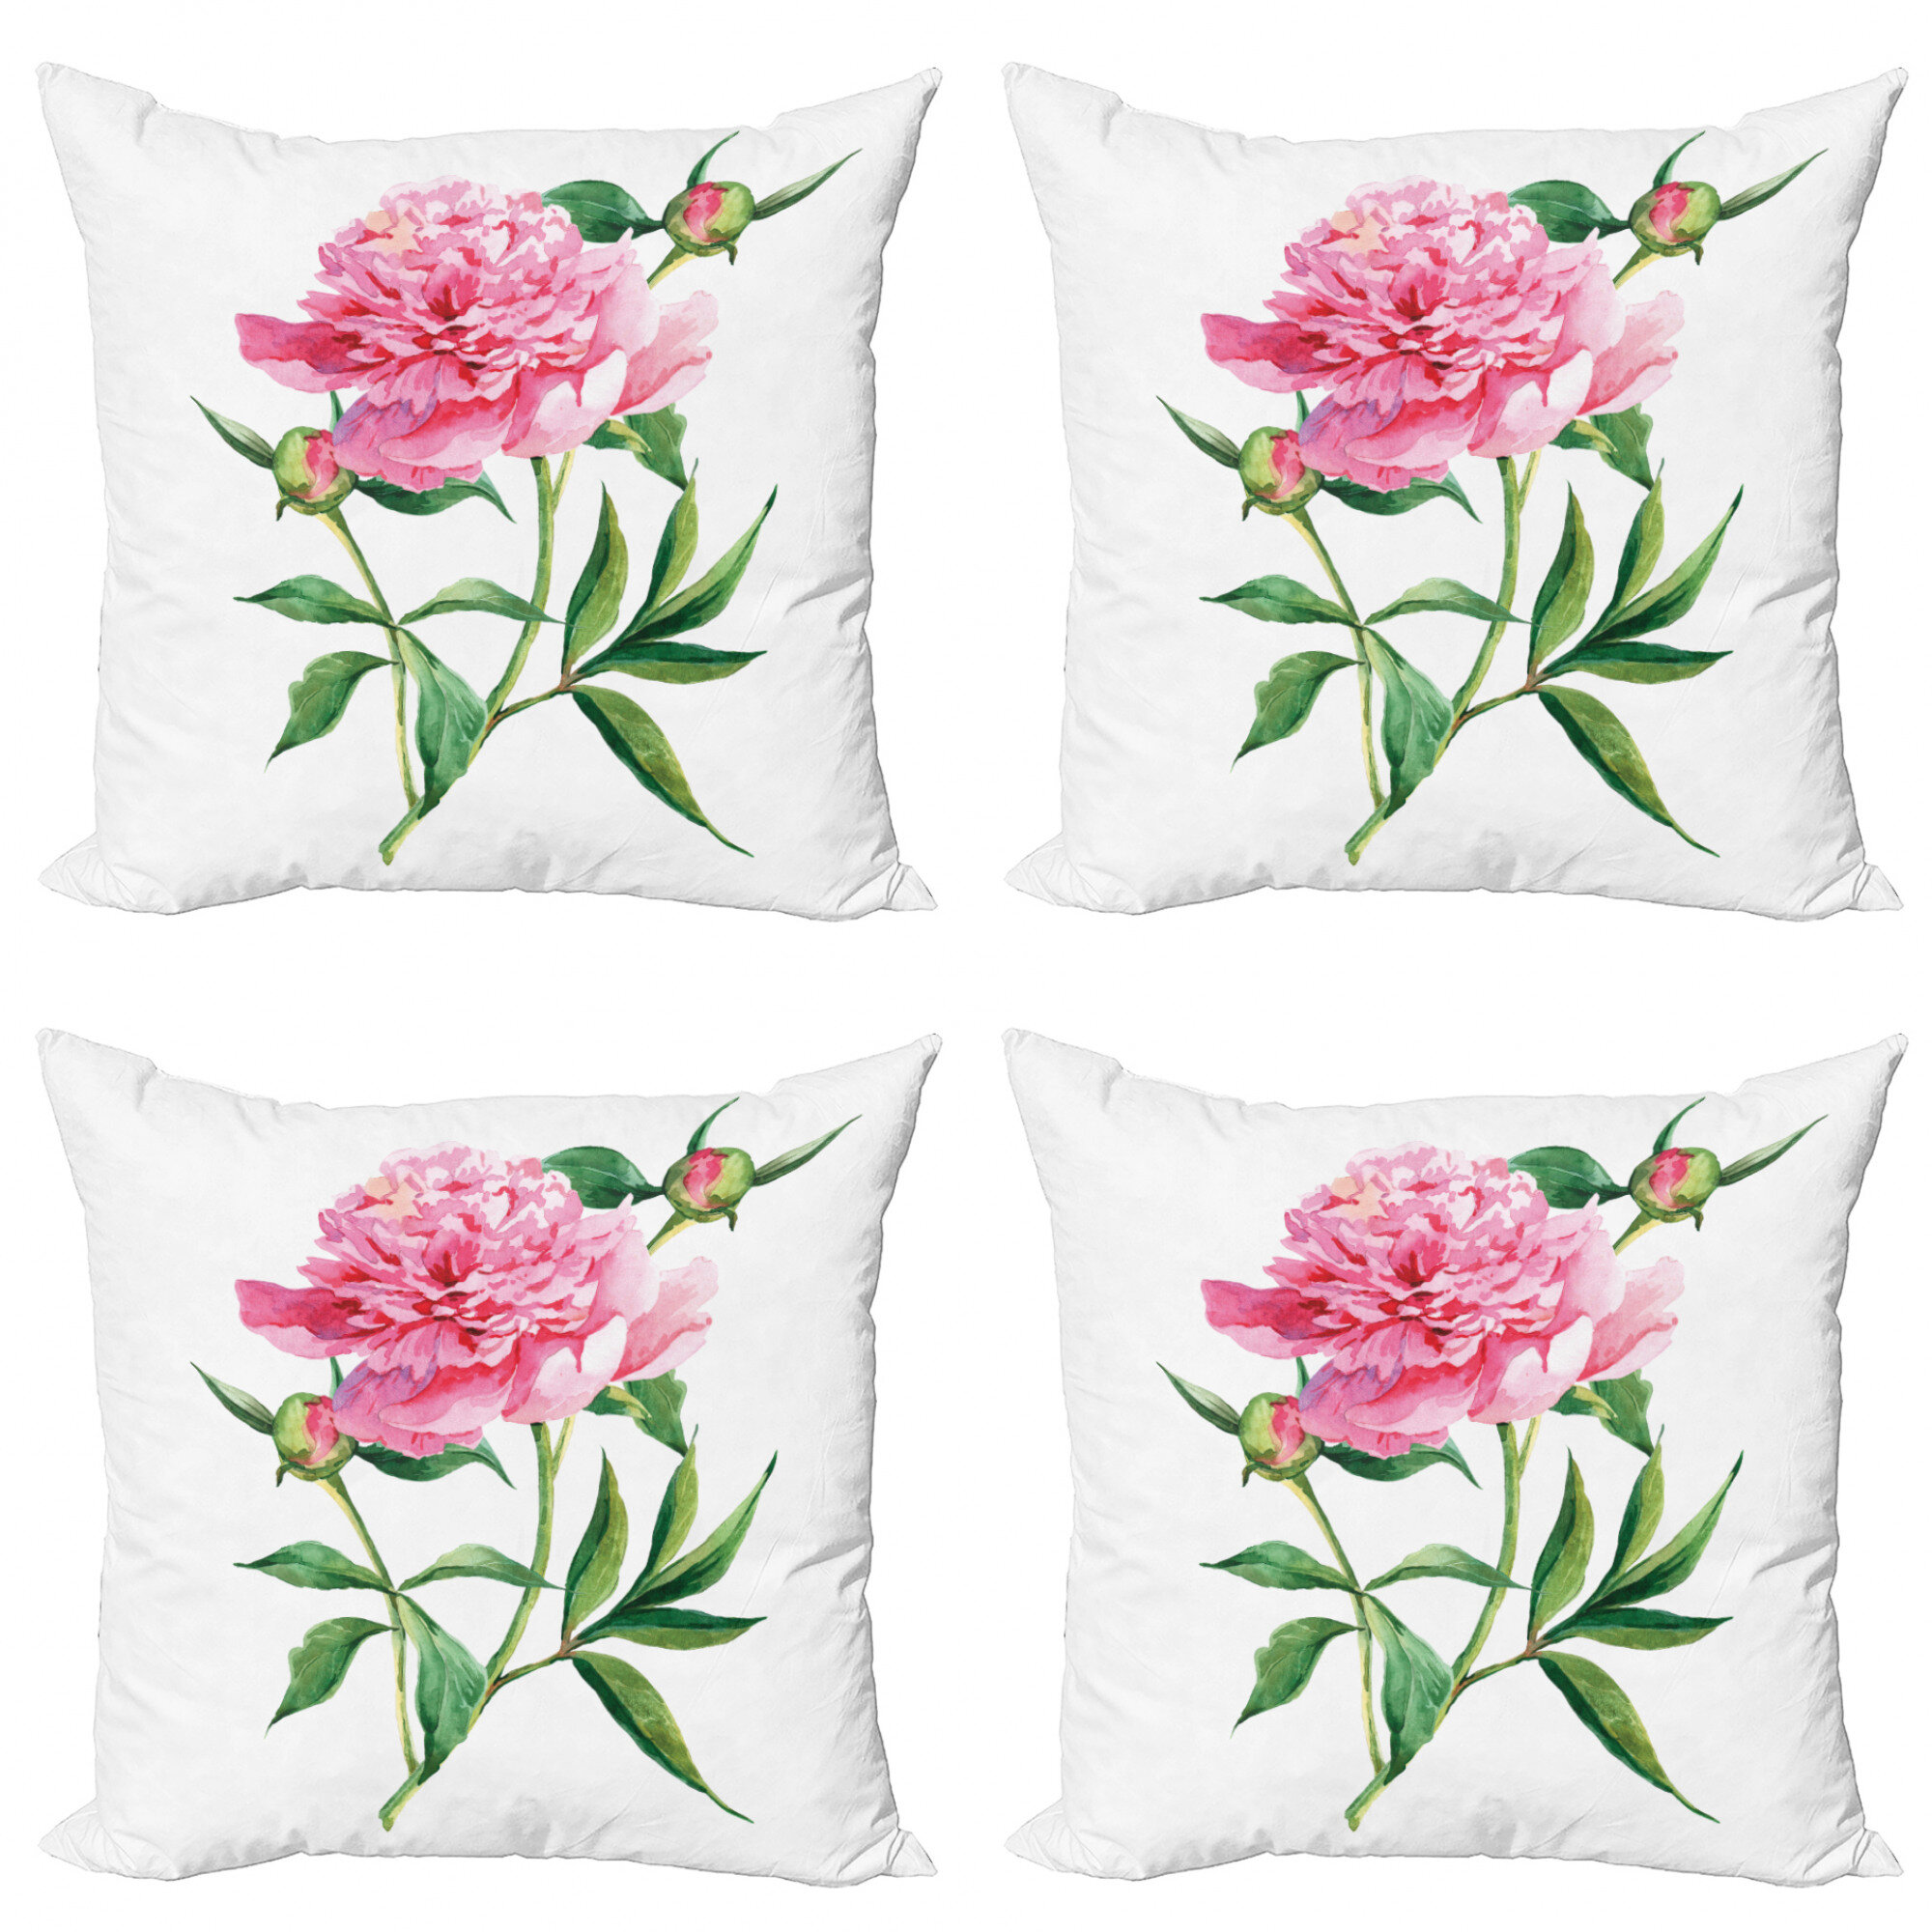 Ambesonne Watercolor Flower Decorative Throw Pillow Case Pack of 4, Vintage Peony Painting Botanical Spring Garden Flower Nature Theme, Cushion Cover